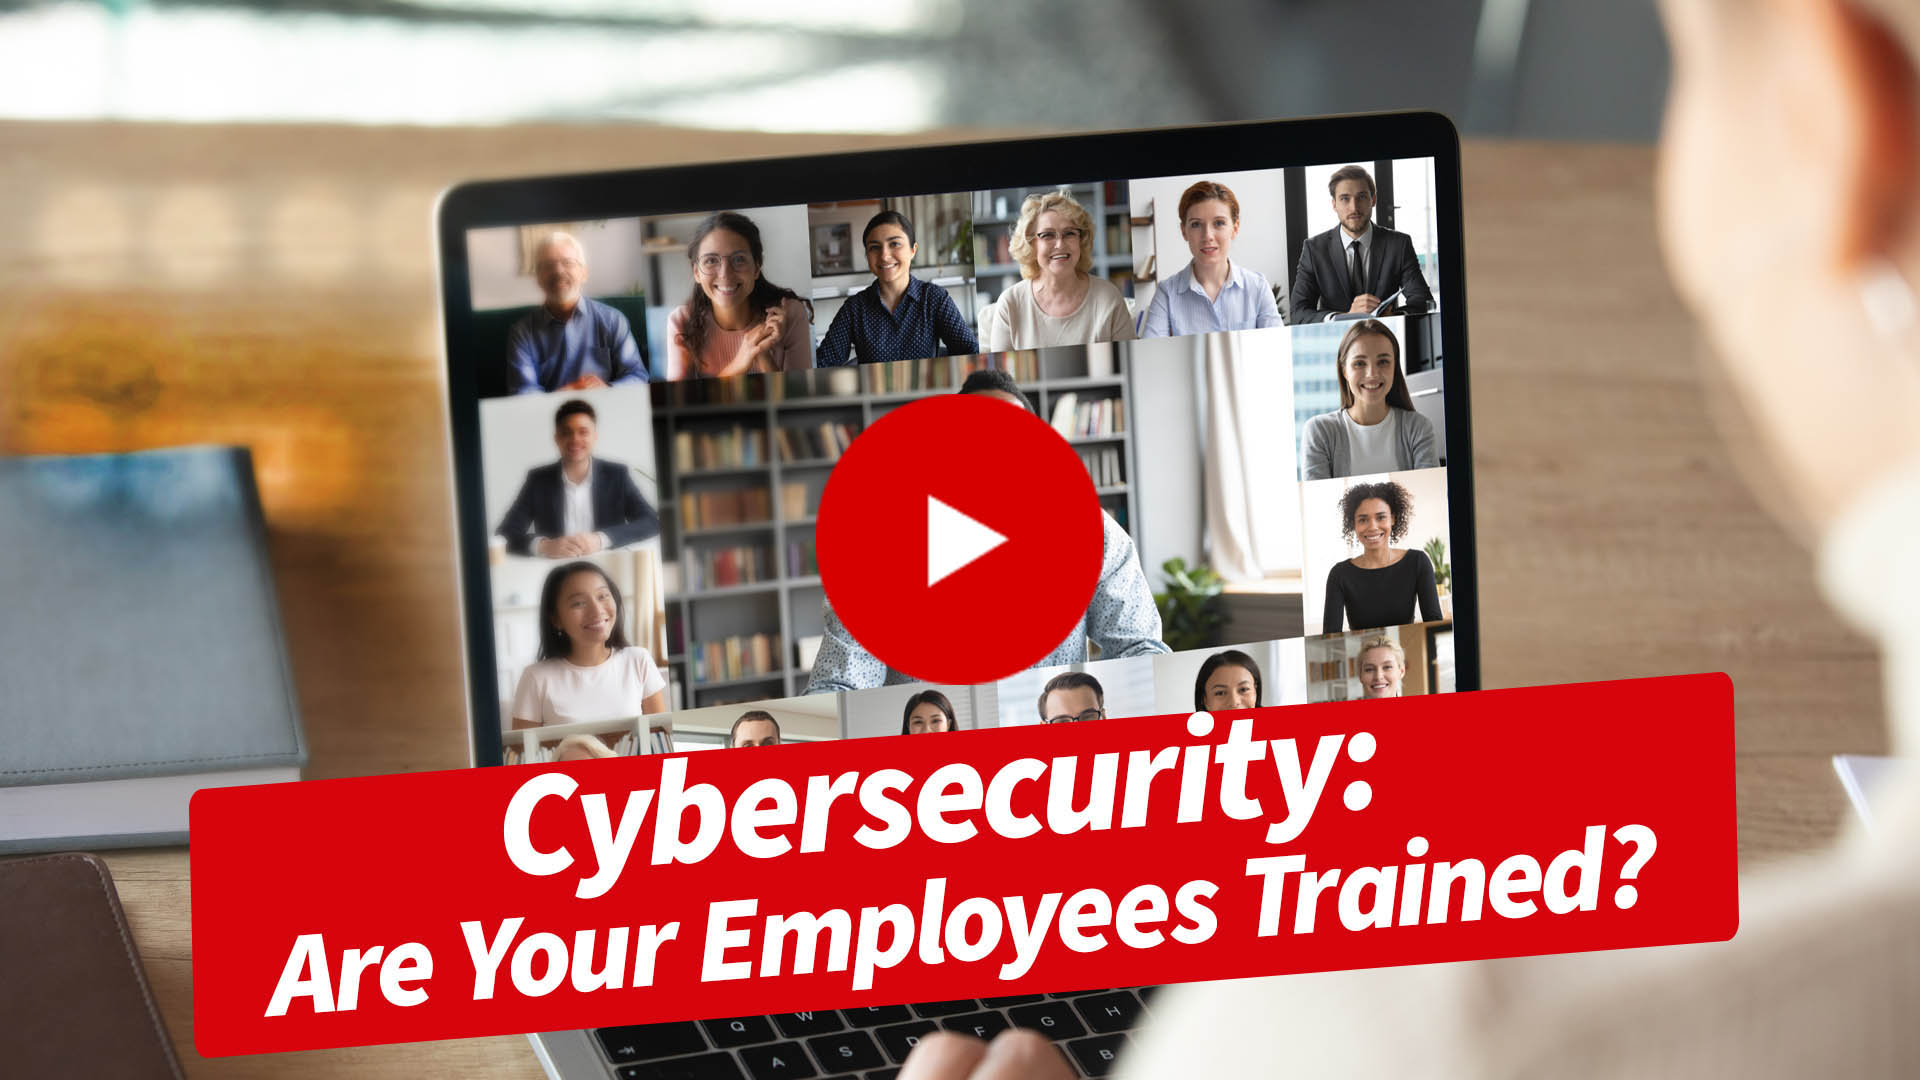 Cybersecurity Are Your Employees Trained?